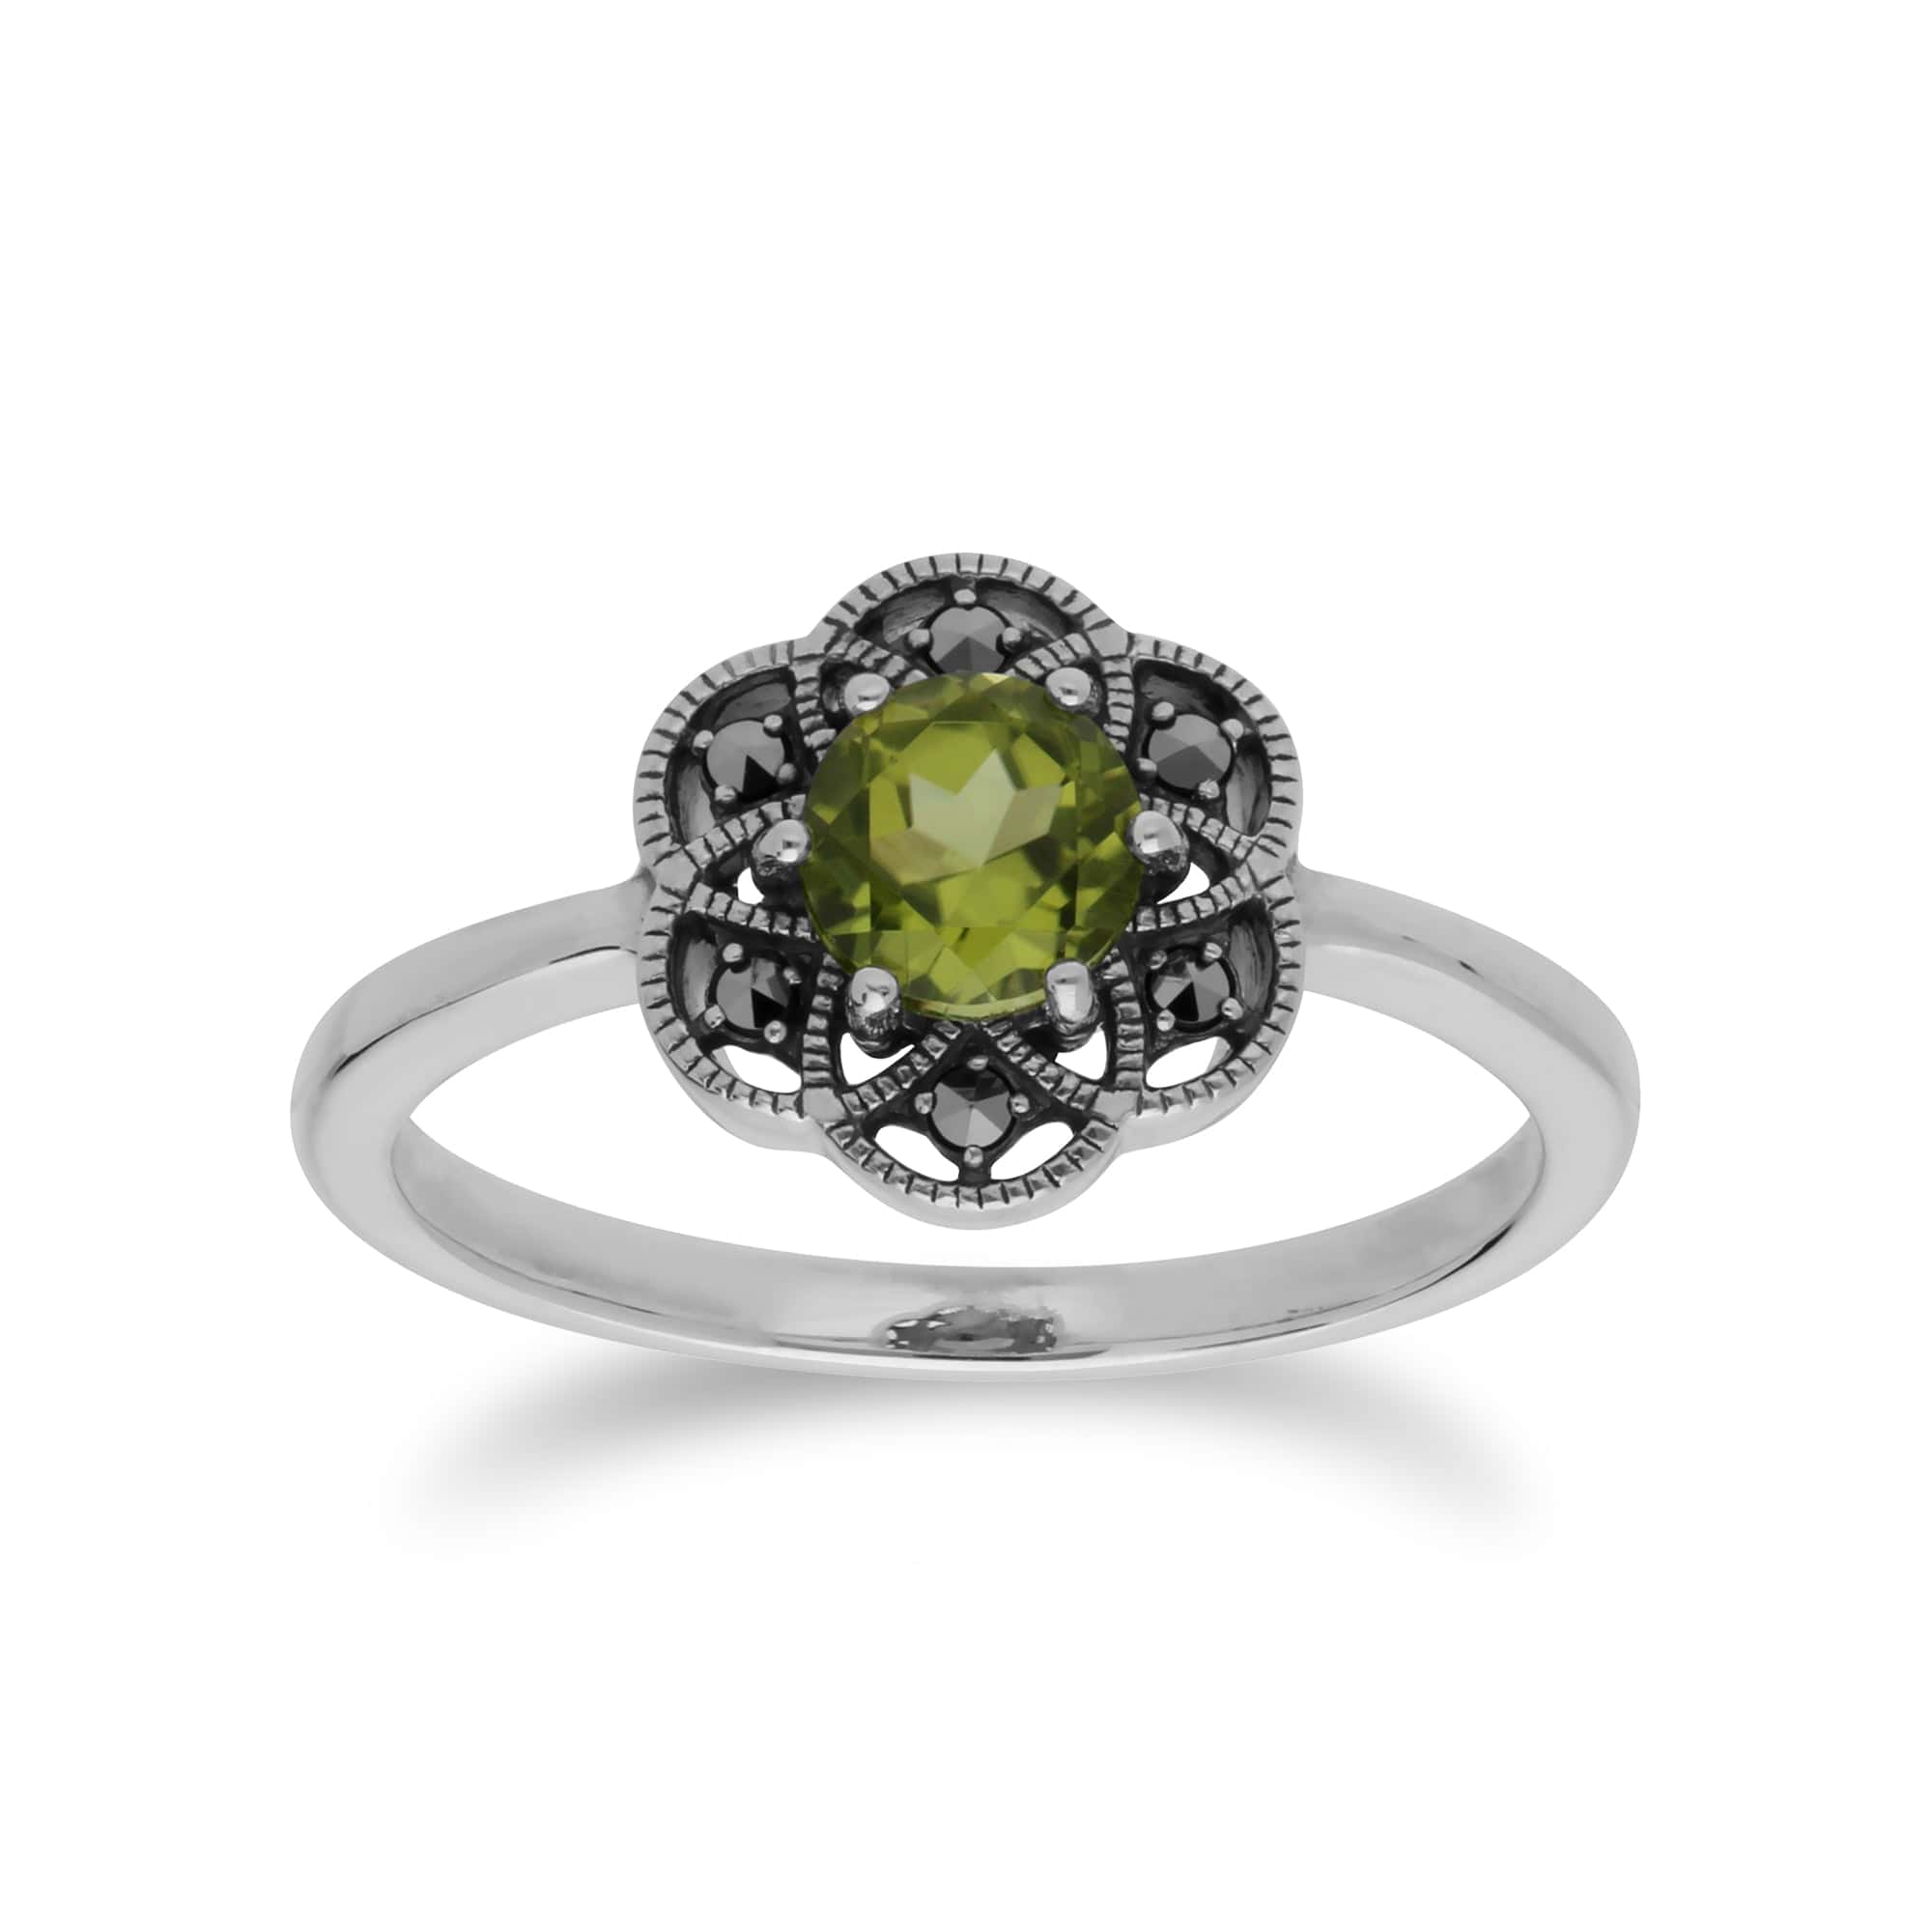 Floral Round Peridot & Marcasite Daisy Ring in 925 Sterling Silver - Gemondo